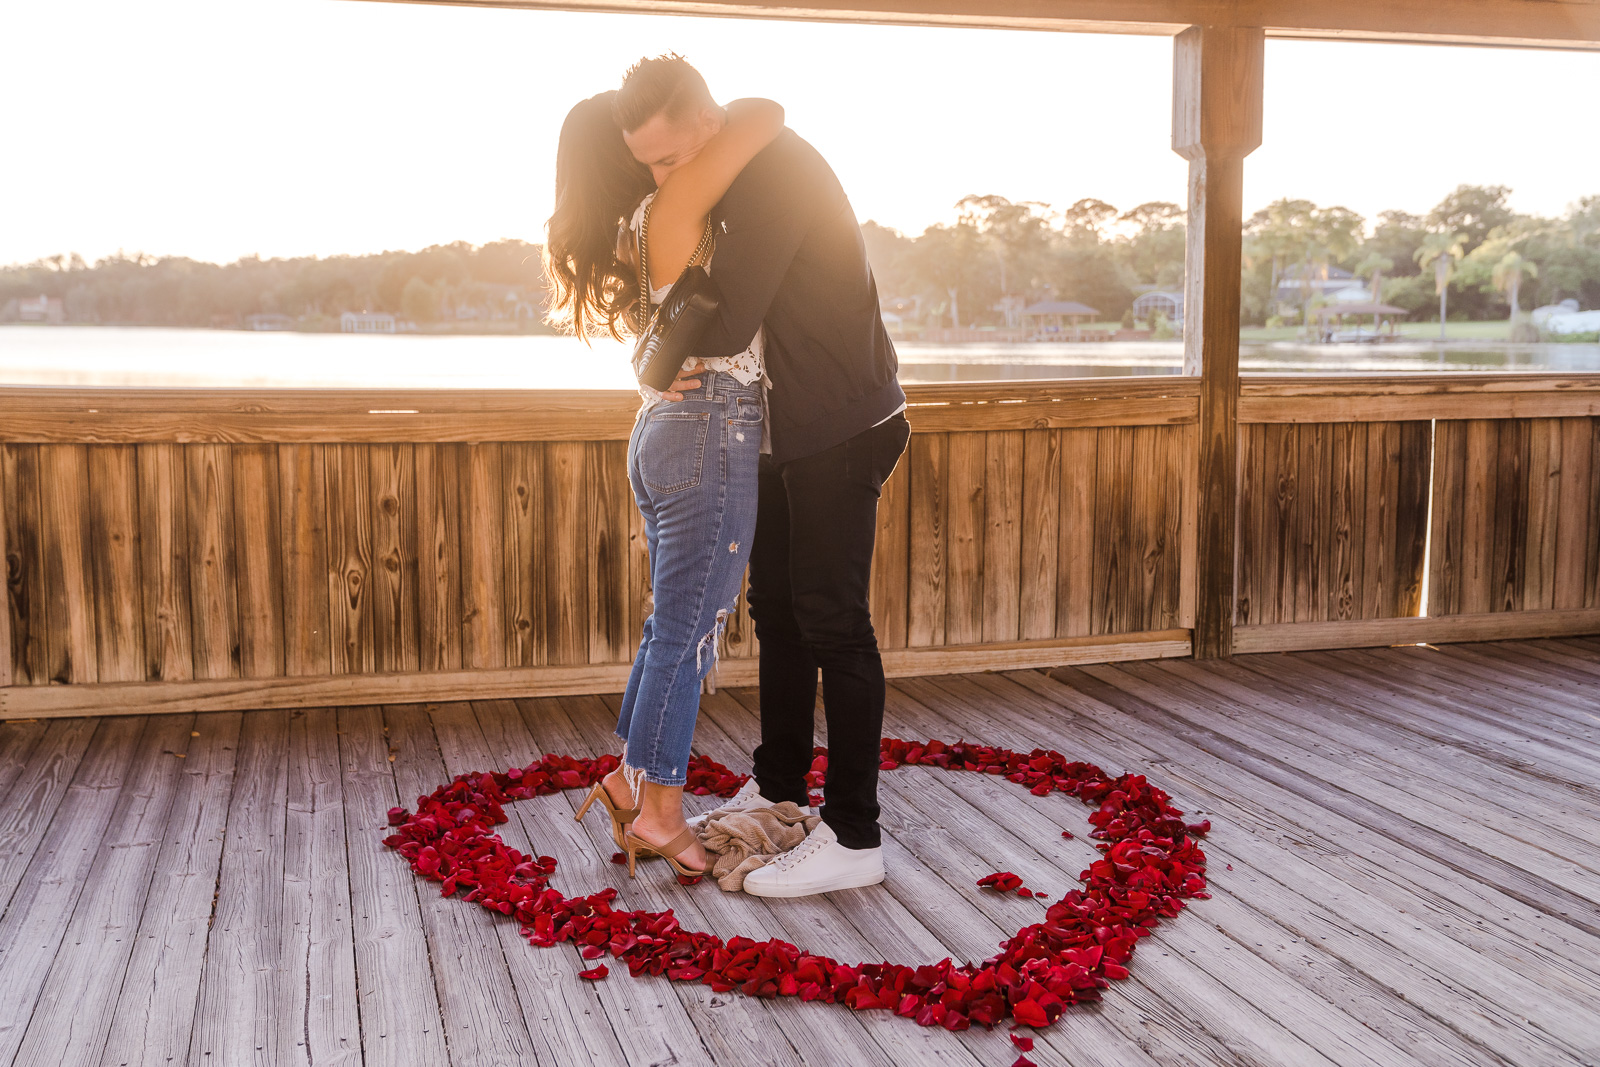 Proposal photographer in Orlando captures romantic sunset engagement at Enzo's on the Lake